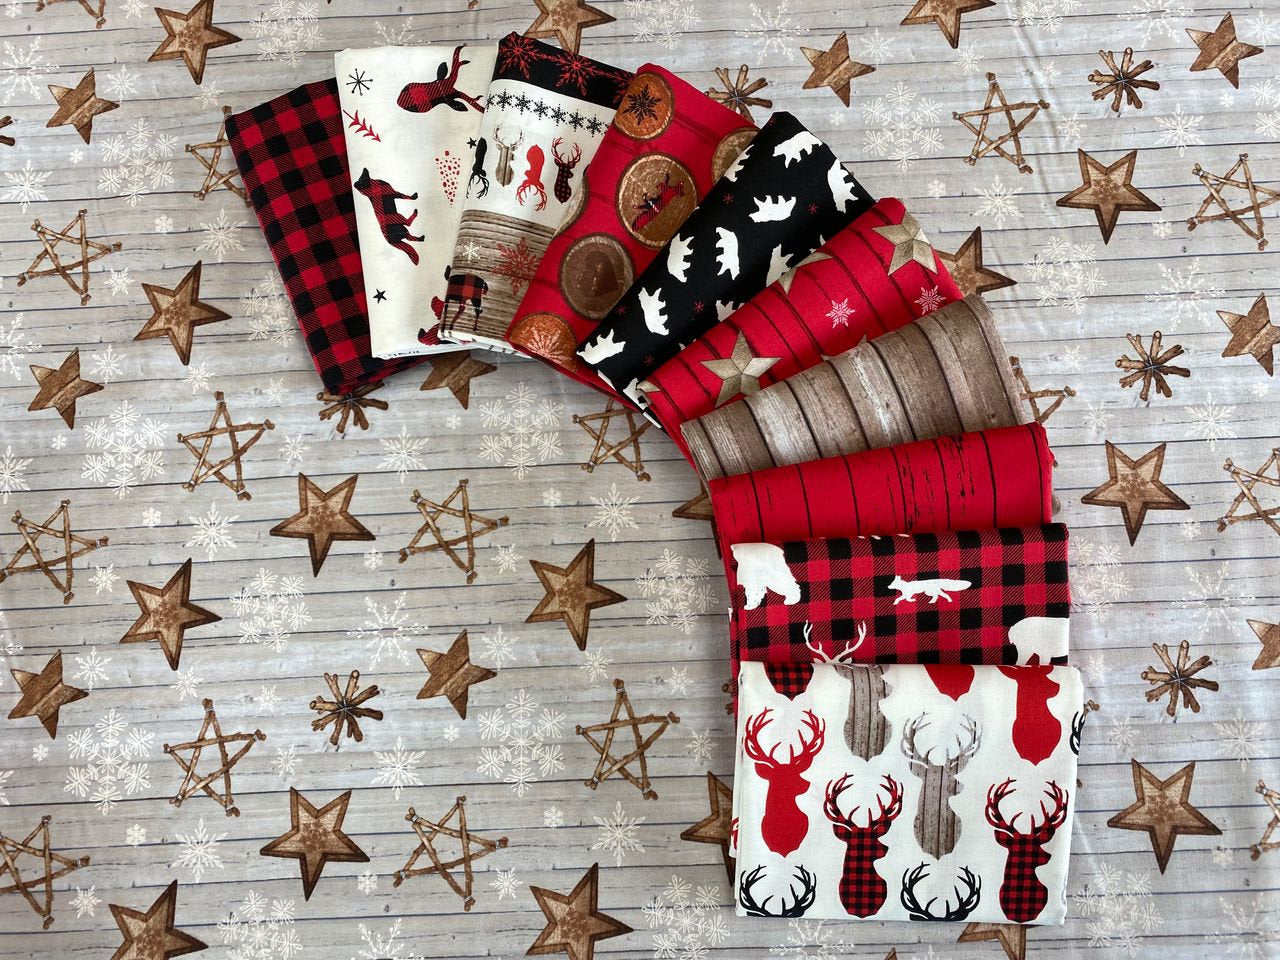 Warm Winter Wishes by Lucie Crovatto Wood Grain with Snowflakes & Stars Lt Brown 5875-33 Cotton Woven Fabric